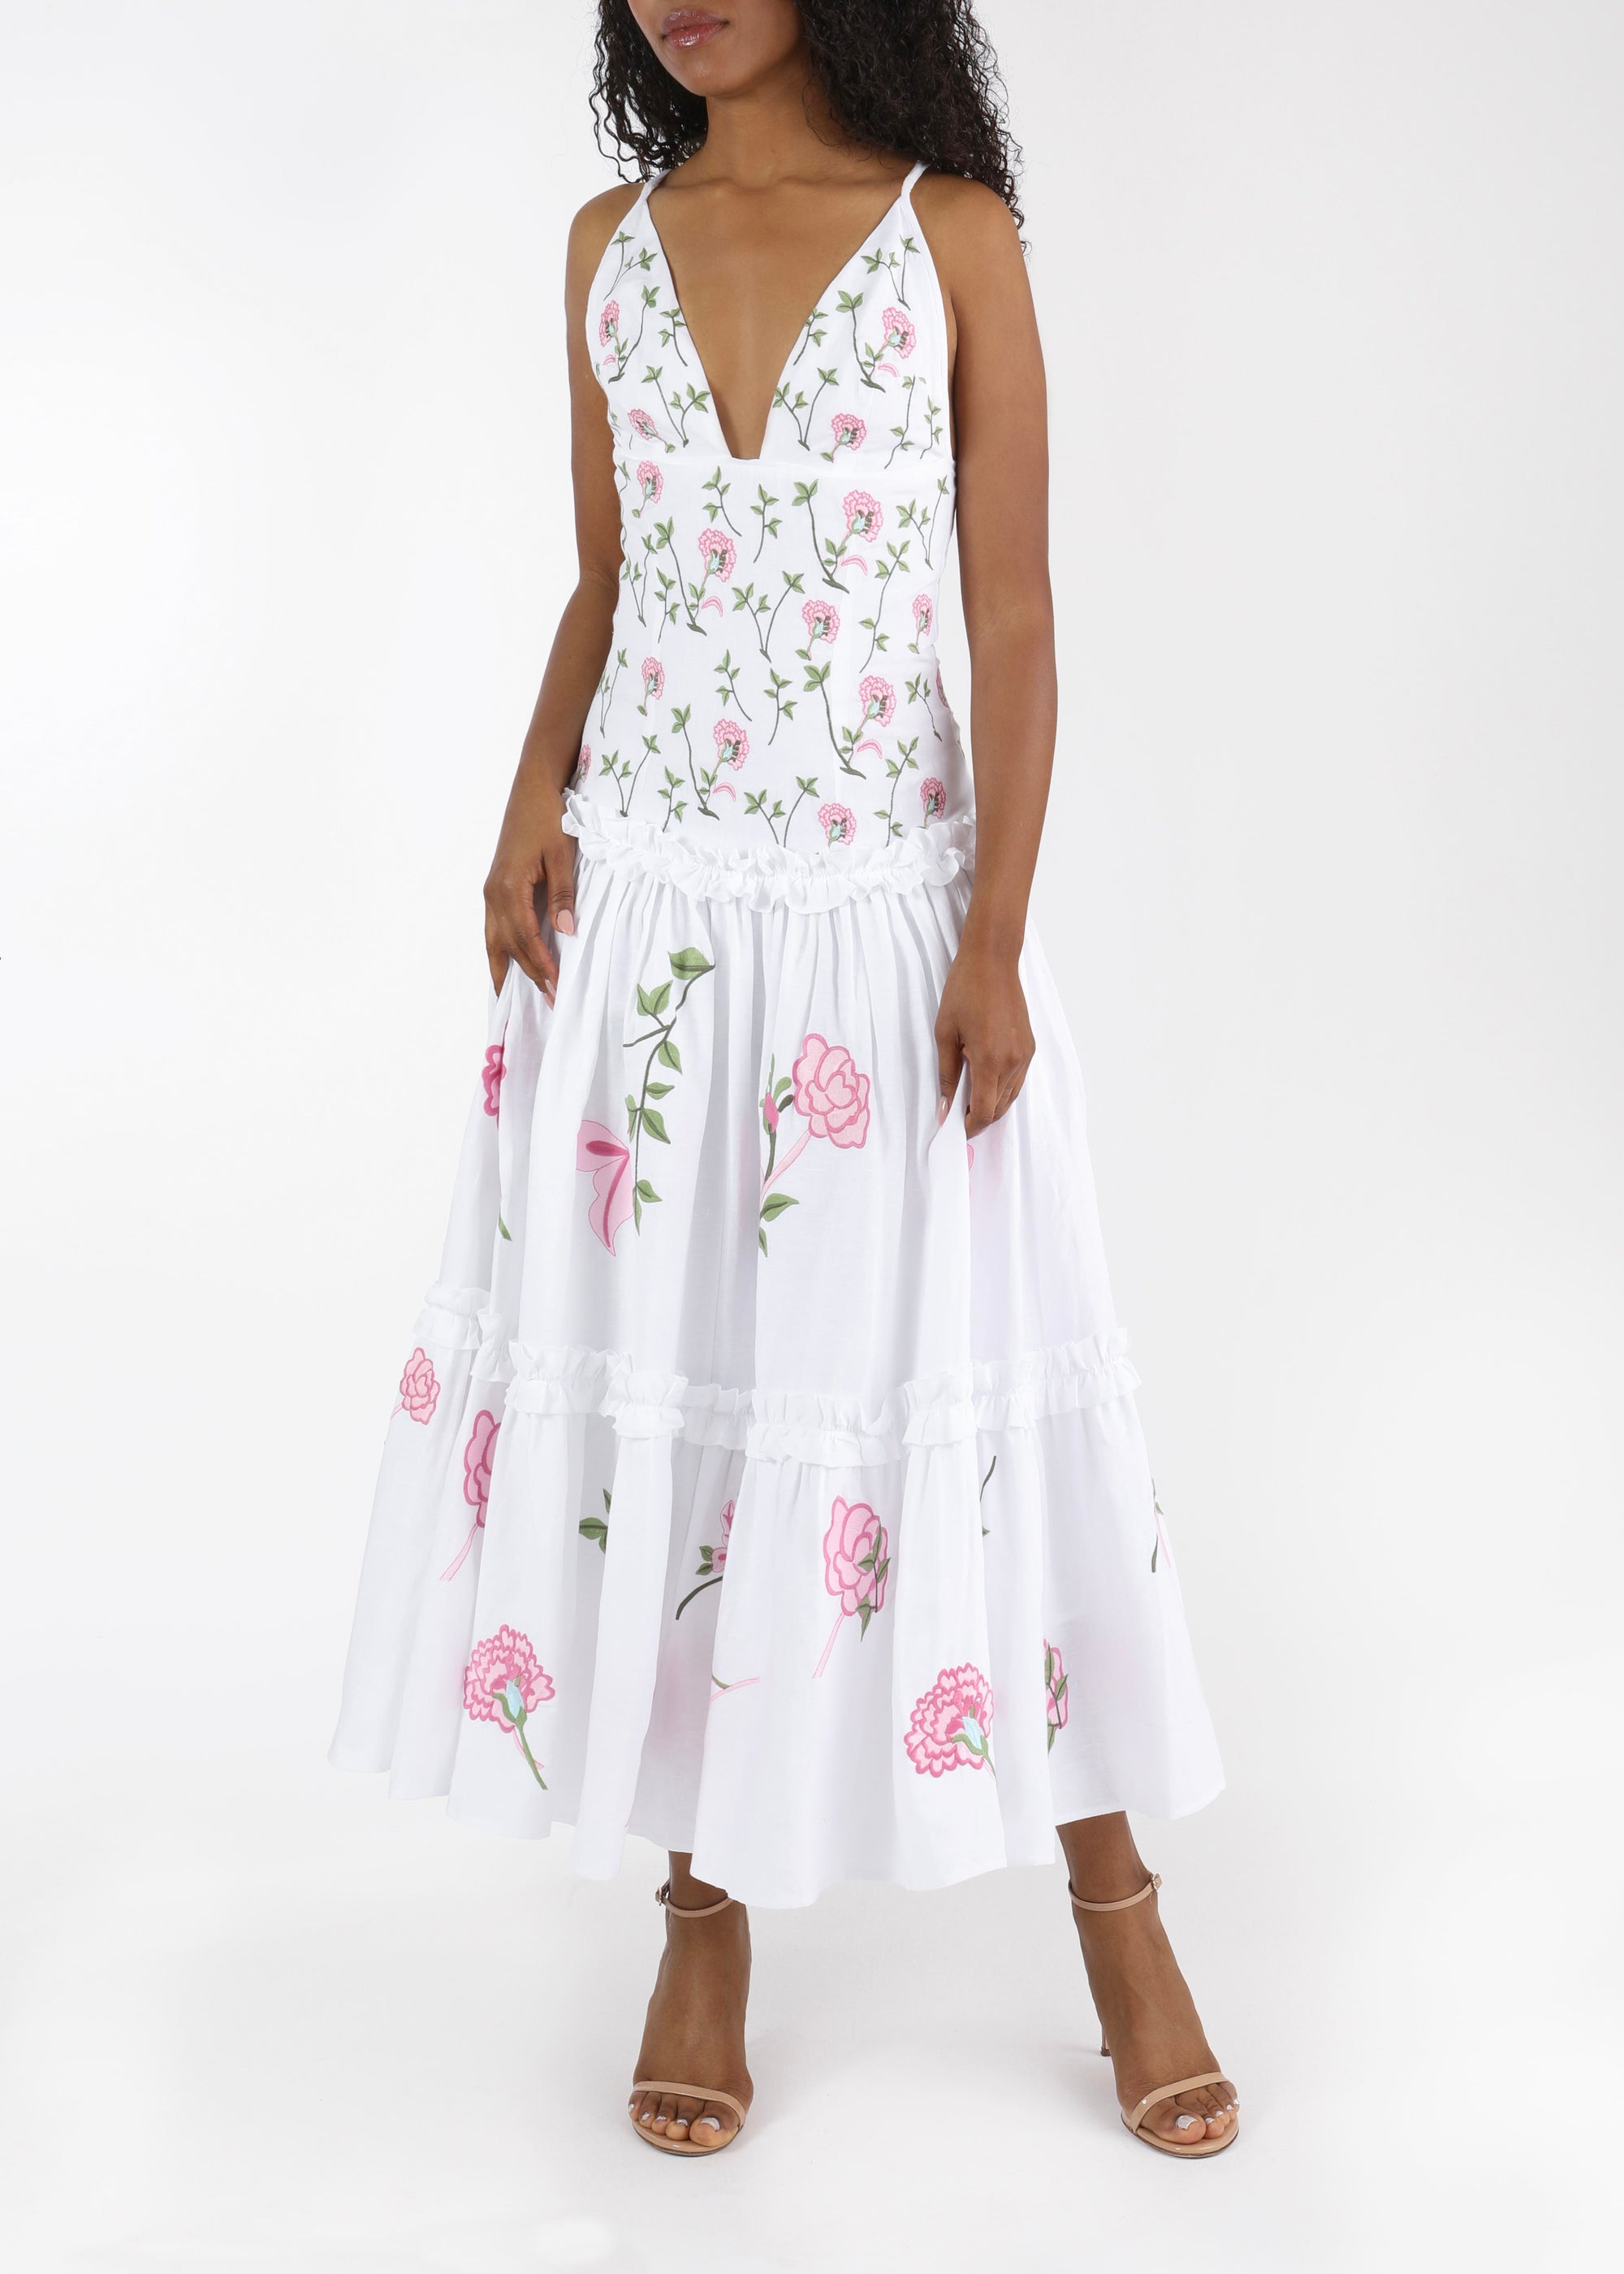 Fanm Mon and Over the Moon Vaughan Dress with Pink Floral Embroidery 